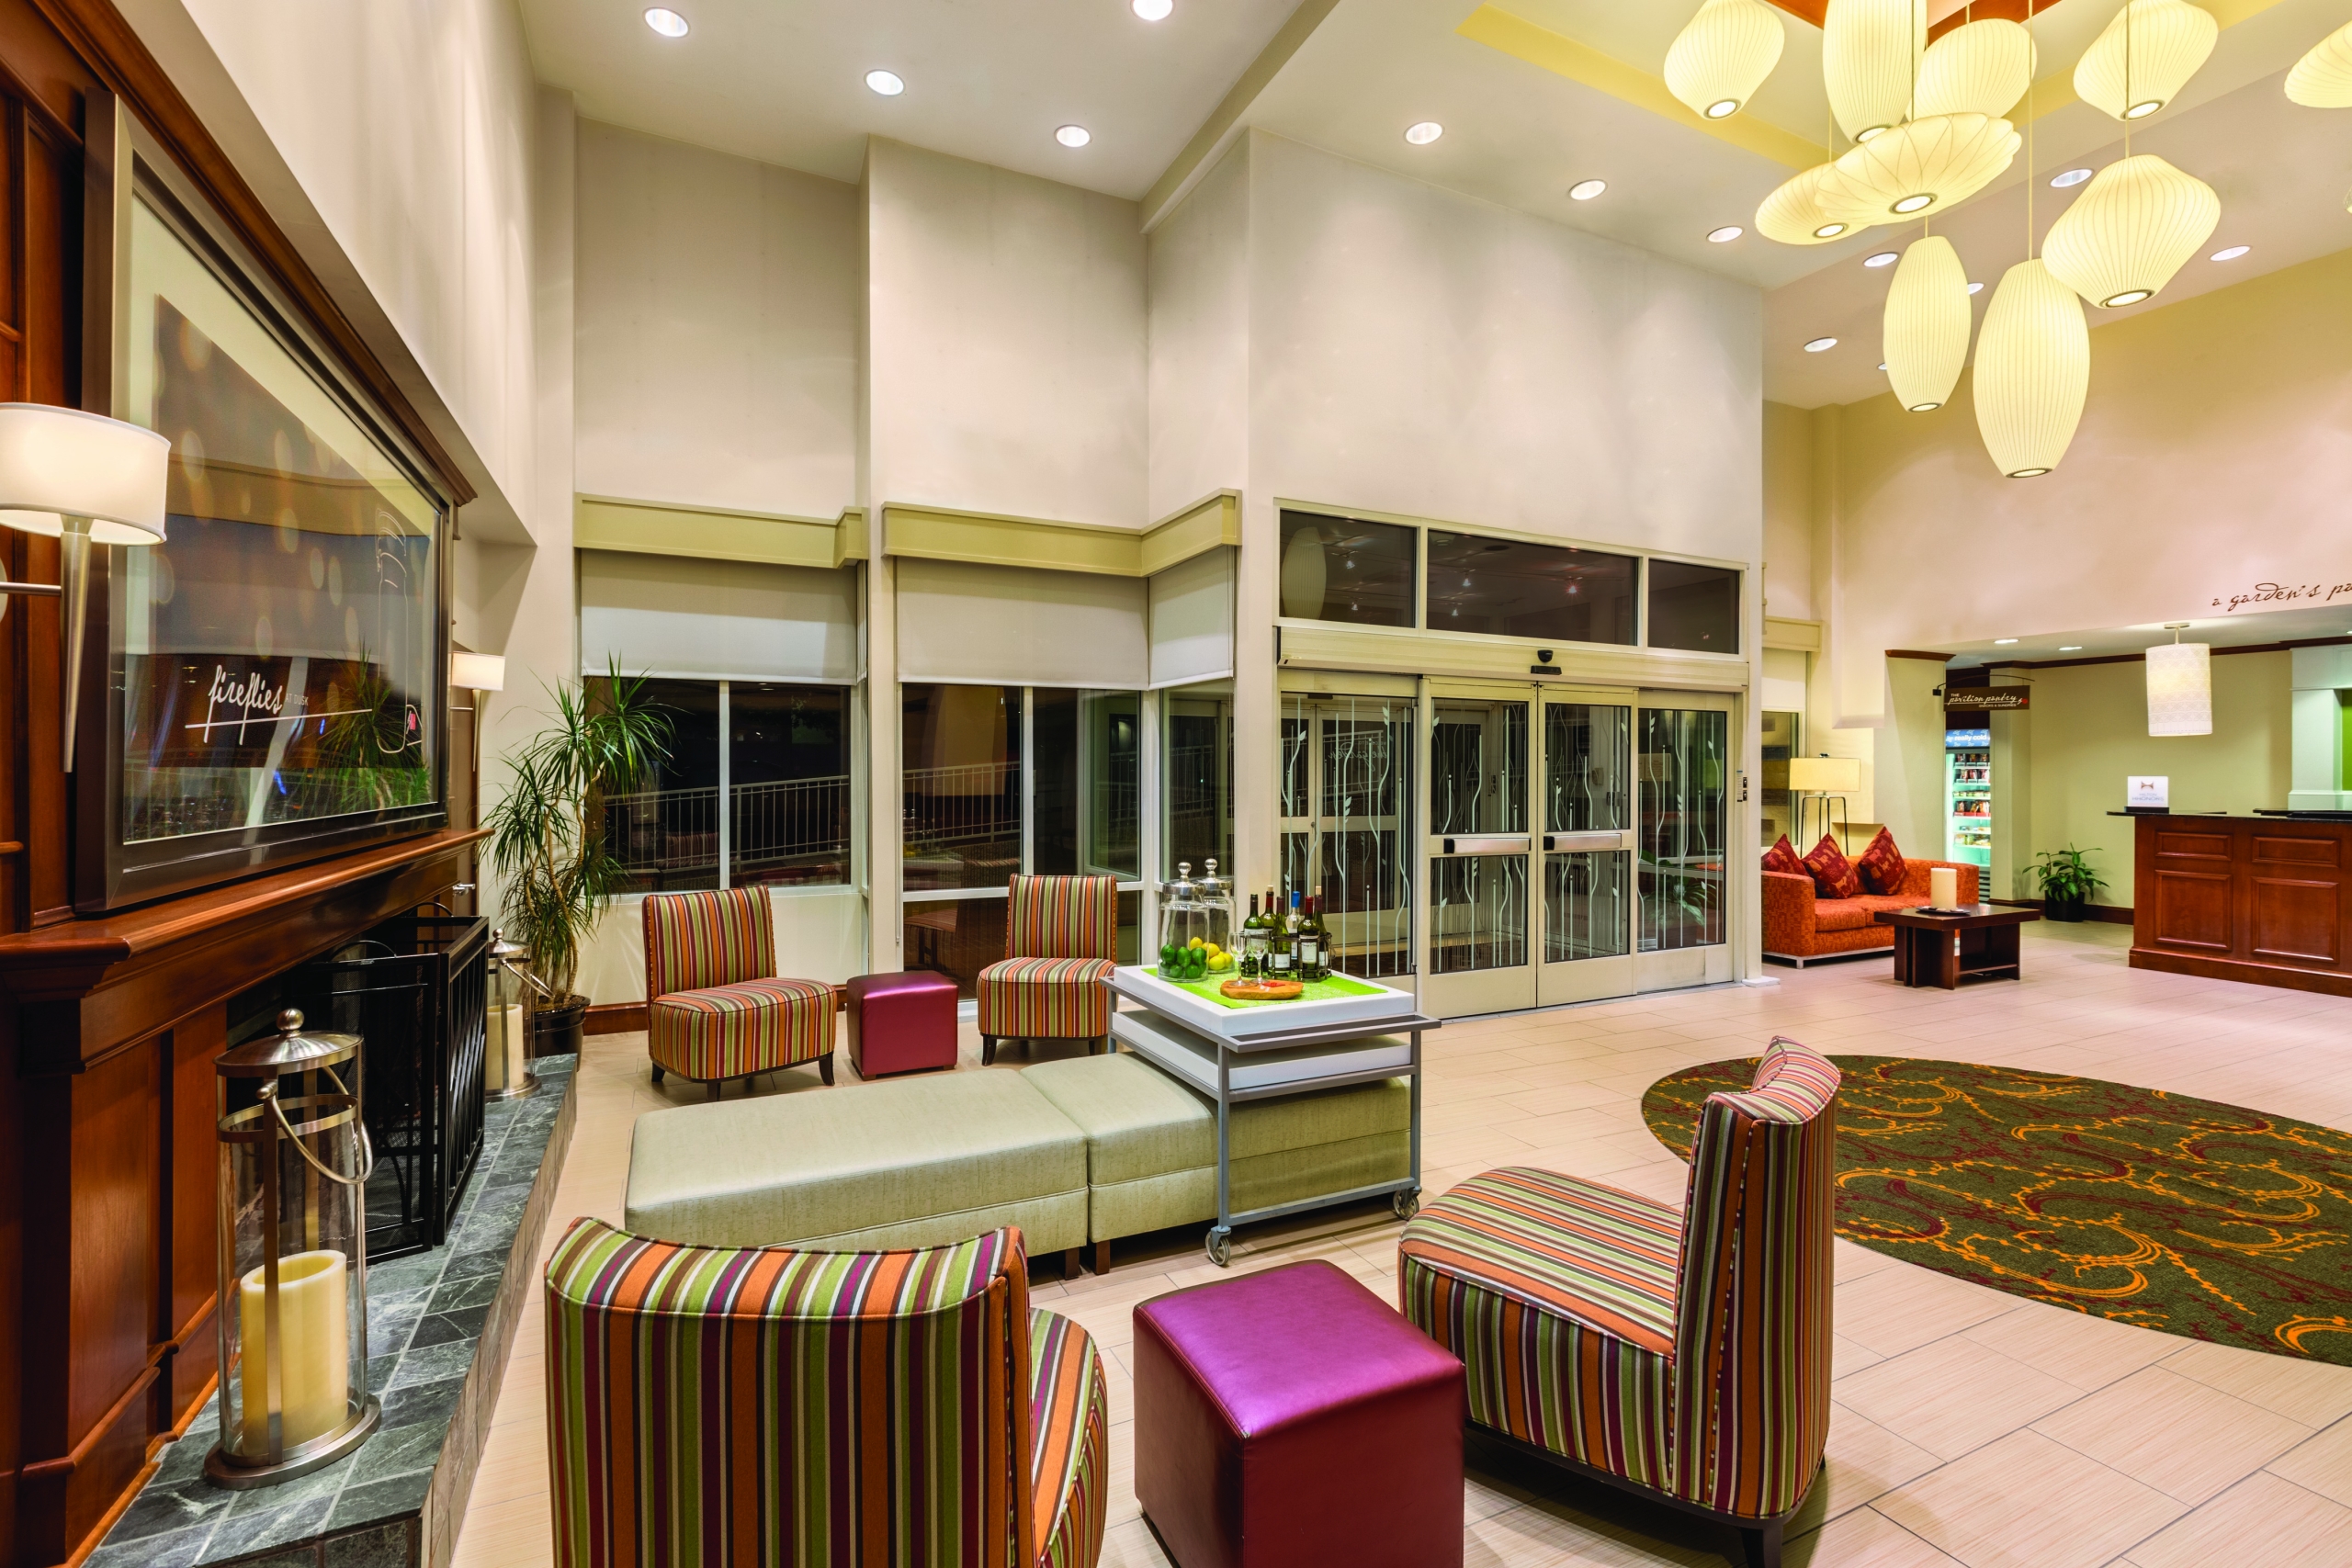 The lobby of the Hilton Garden Inn Arlington hotel with a large fireplace and colorful furniture.